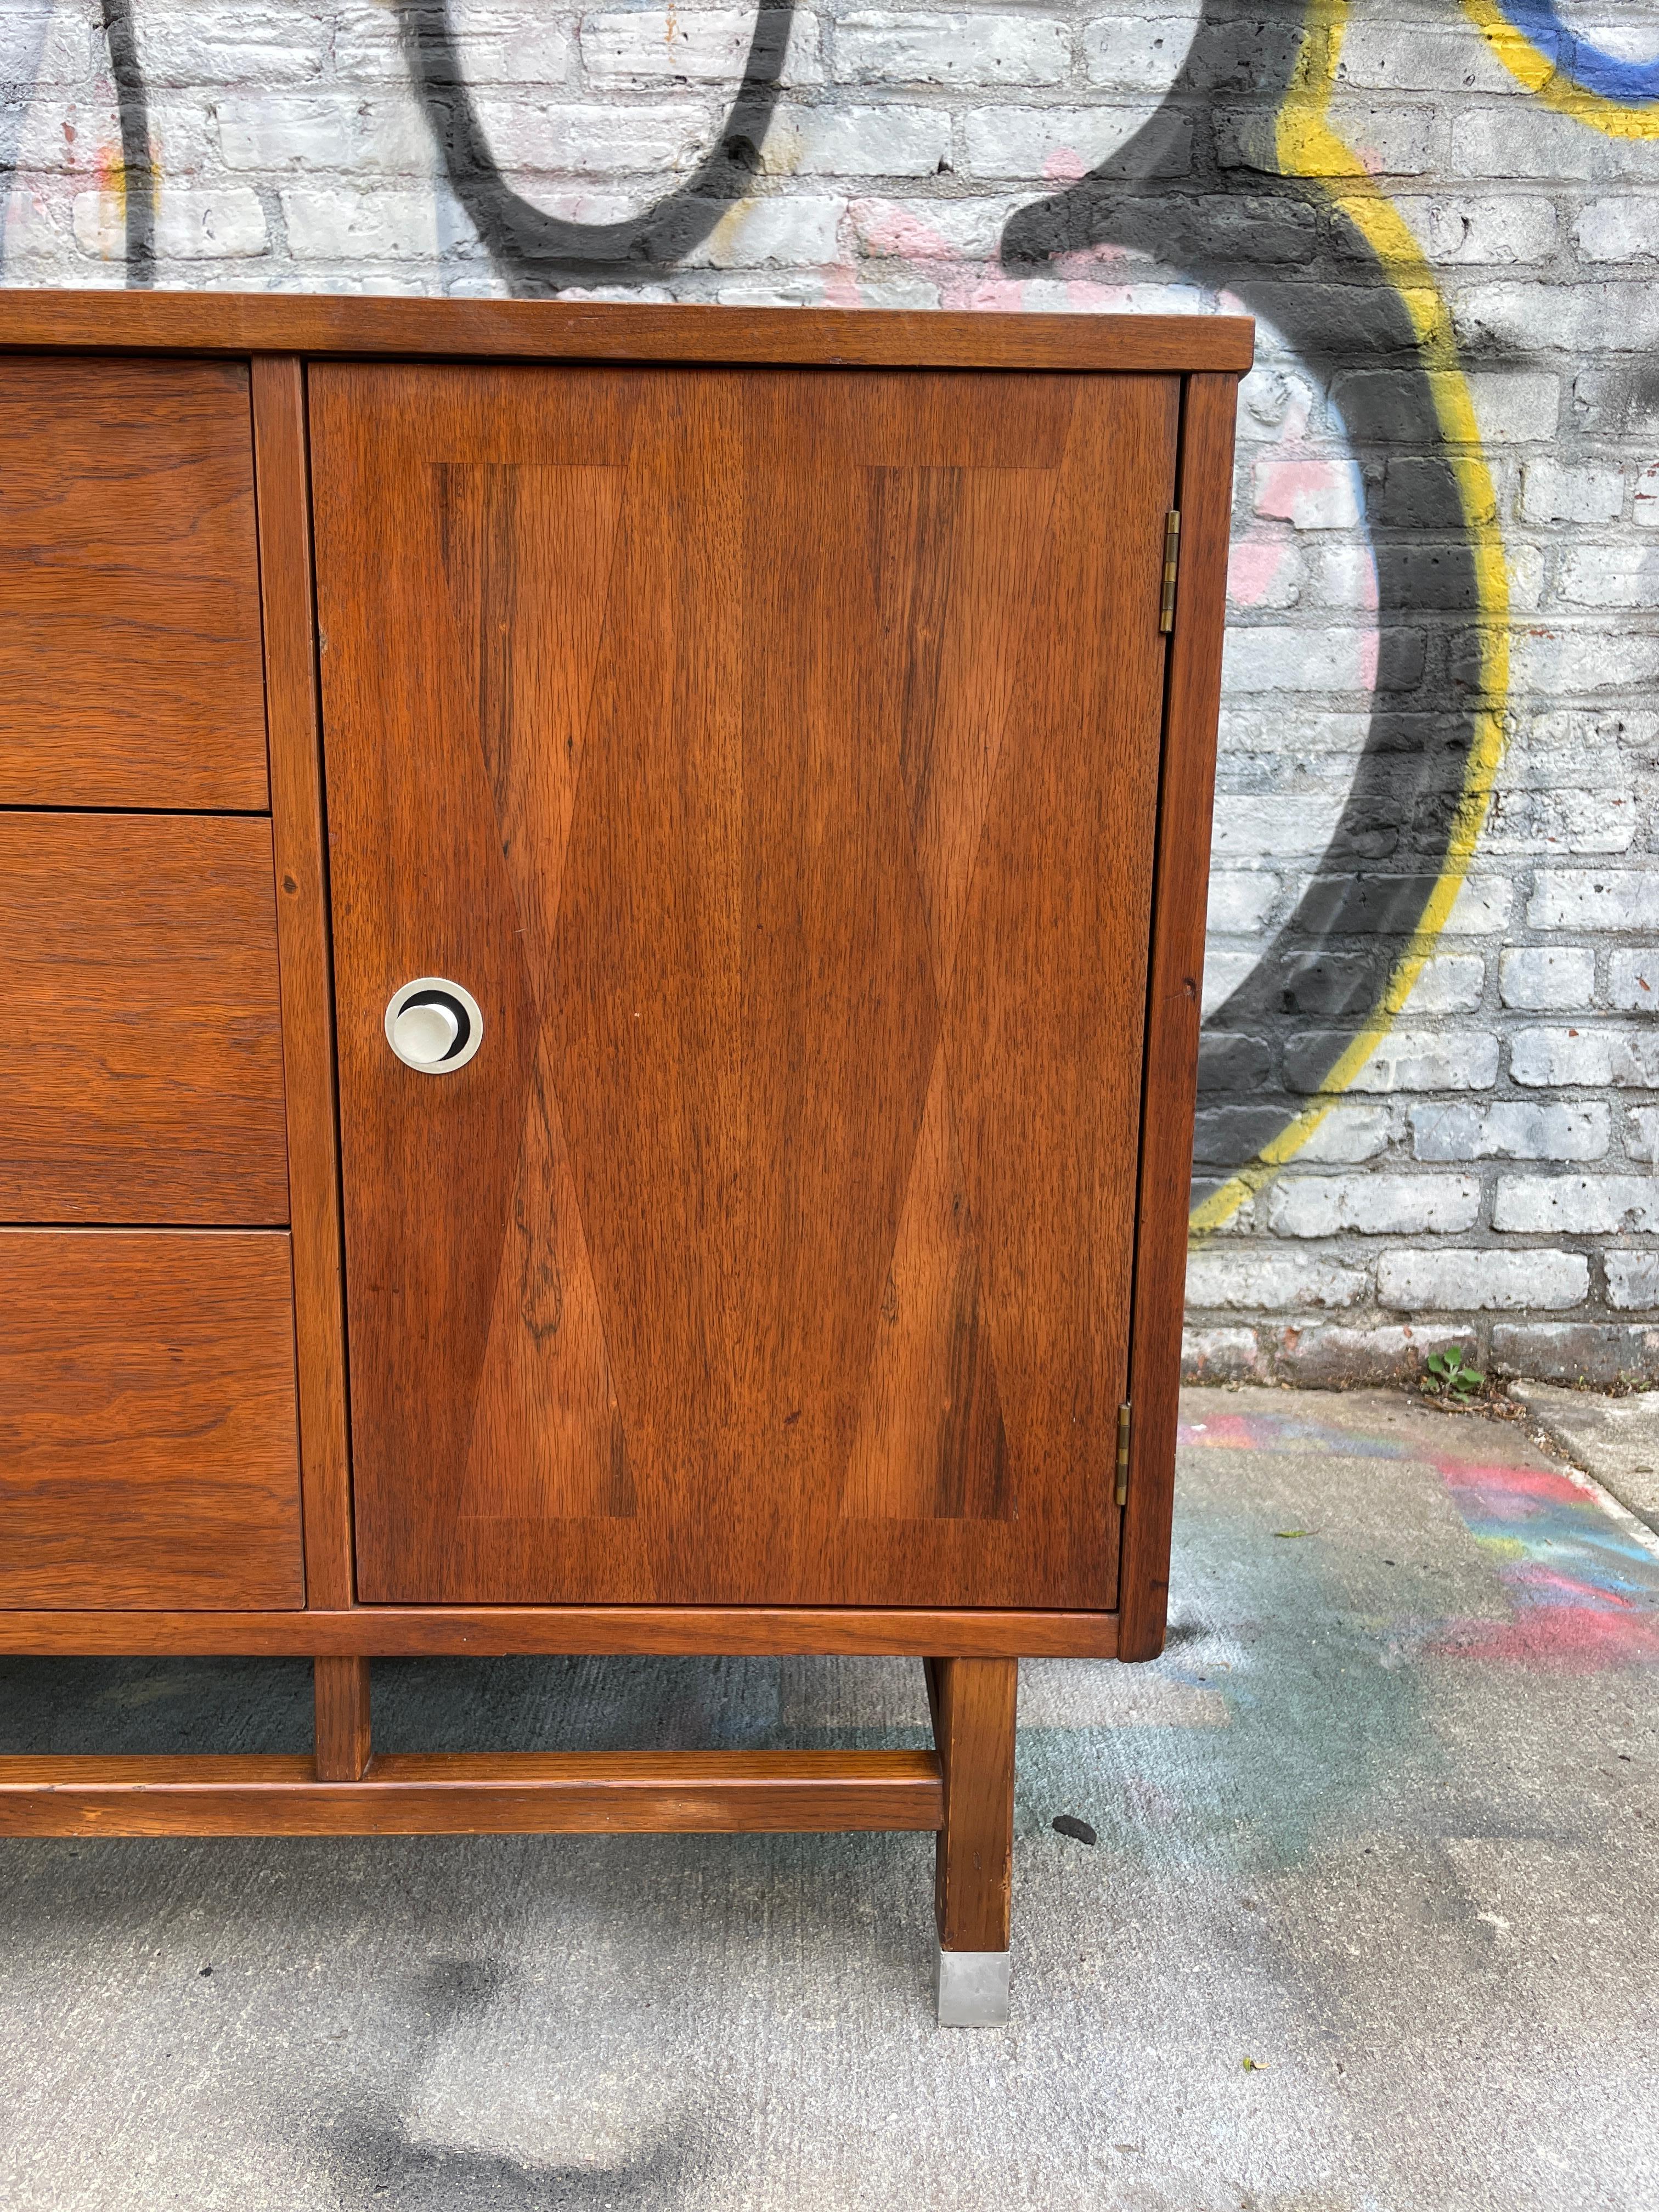 Mid-20th Century Mid-Century Modern Walnut Credenza with Aluminum Pulls by Stanley